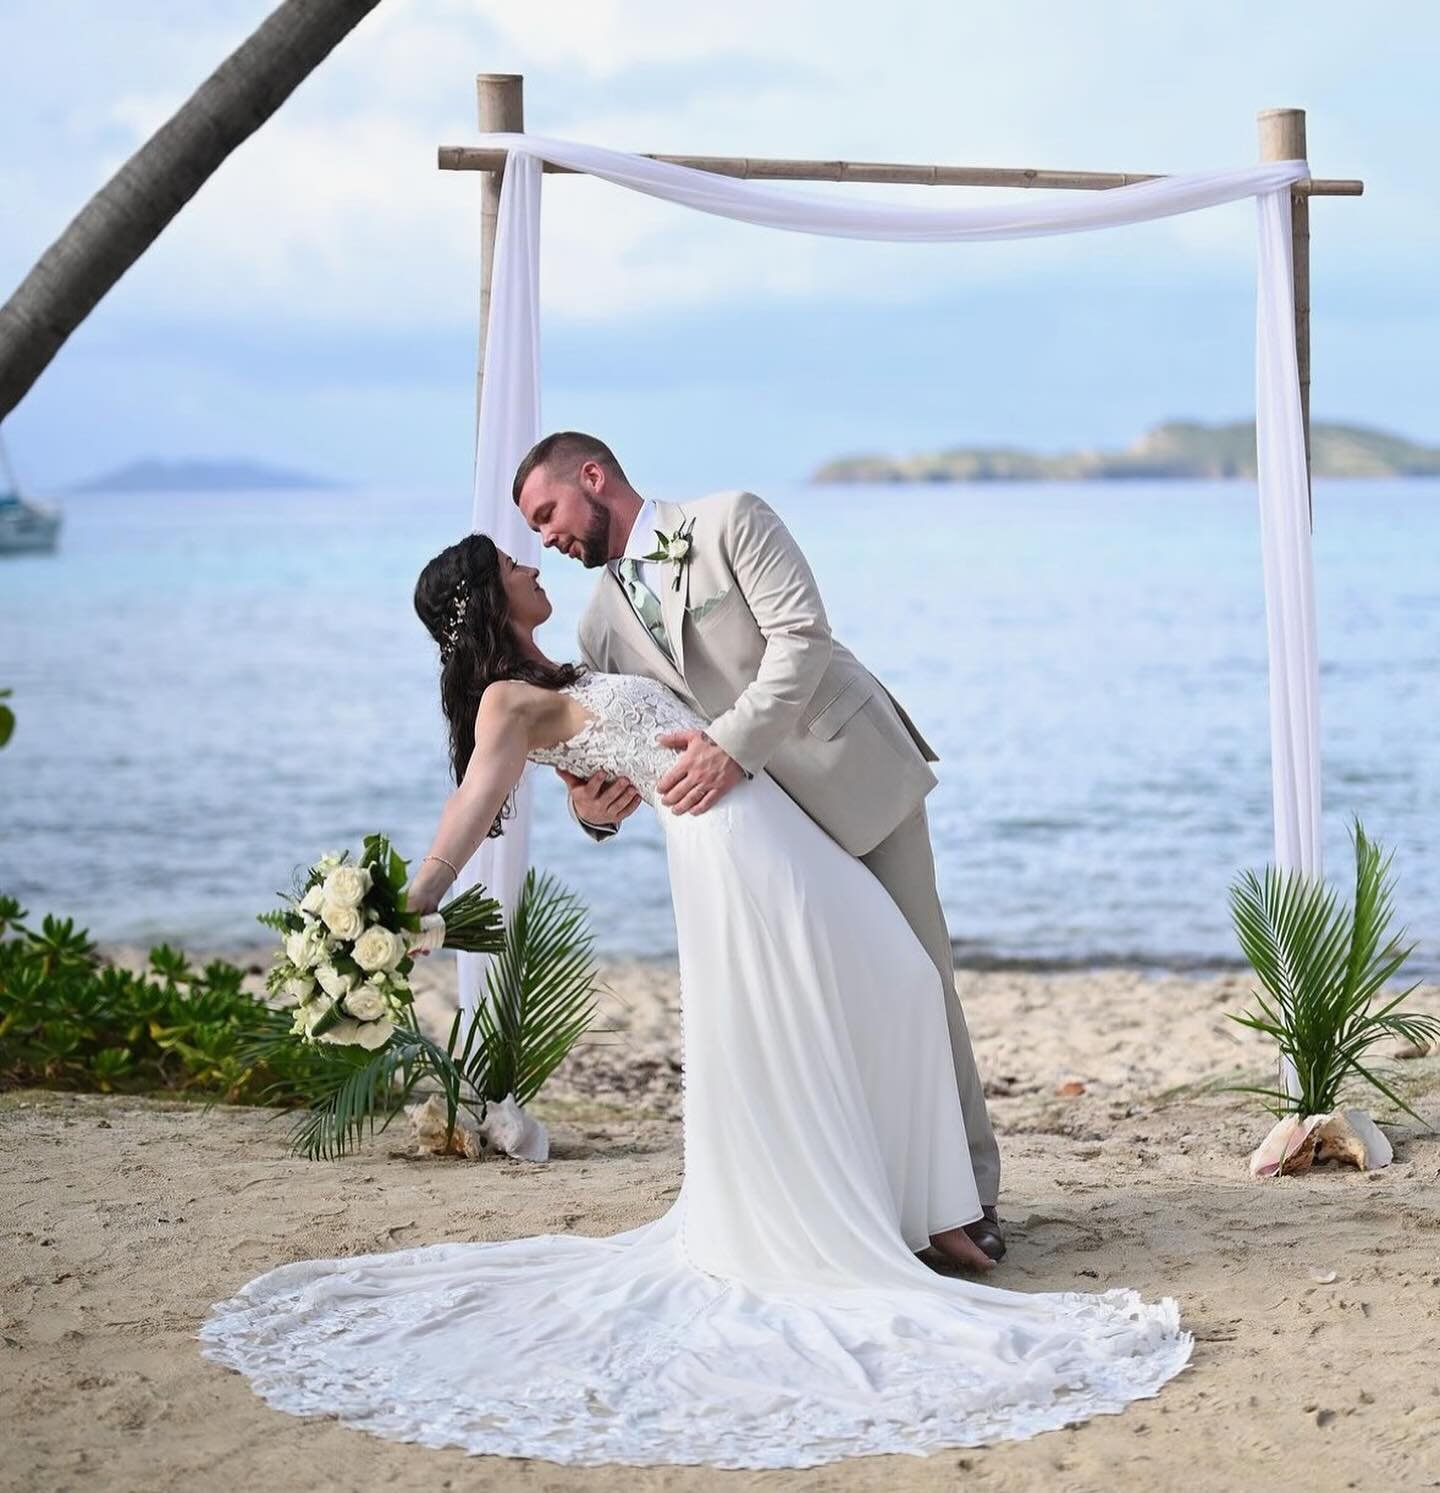 Congratulations to newlyweds, Mr. &amp; Mrs. Kosinski!  Tess, you looked gorgeous and the dress was perfect for your St.Thomas wedding!  We loved working with you and thank you for choosing MVB! 🏝️👰🏻 ❤️